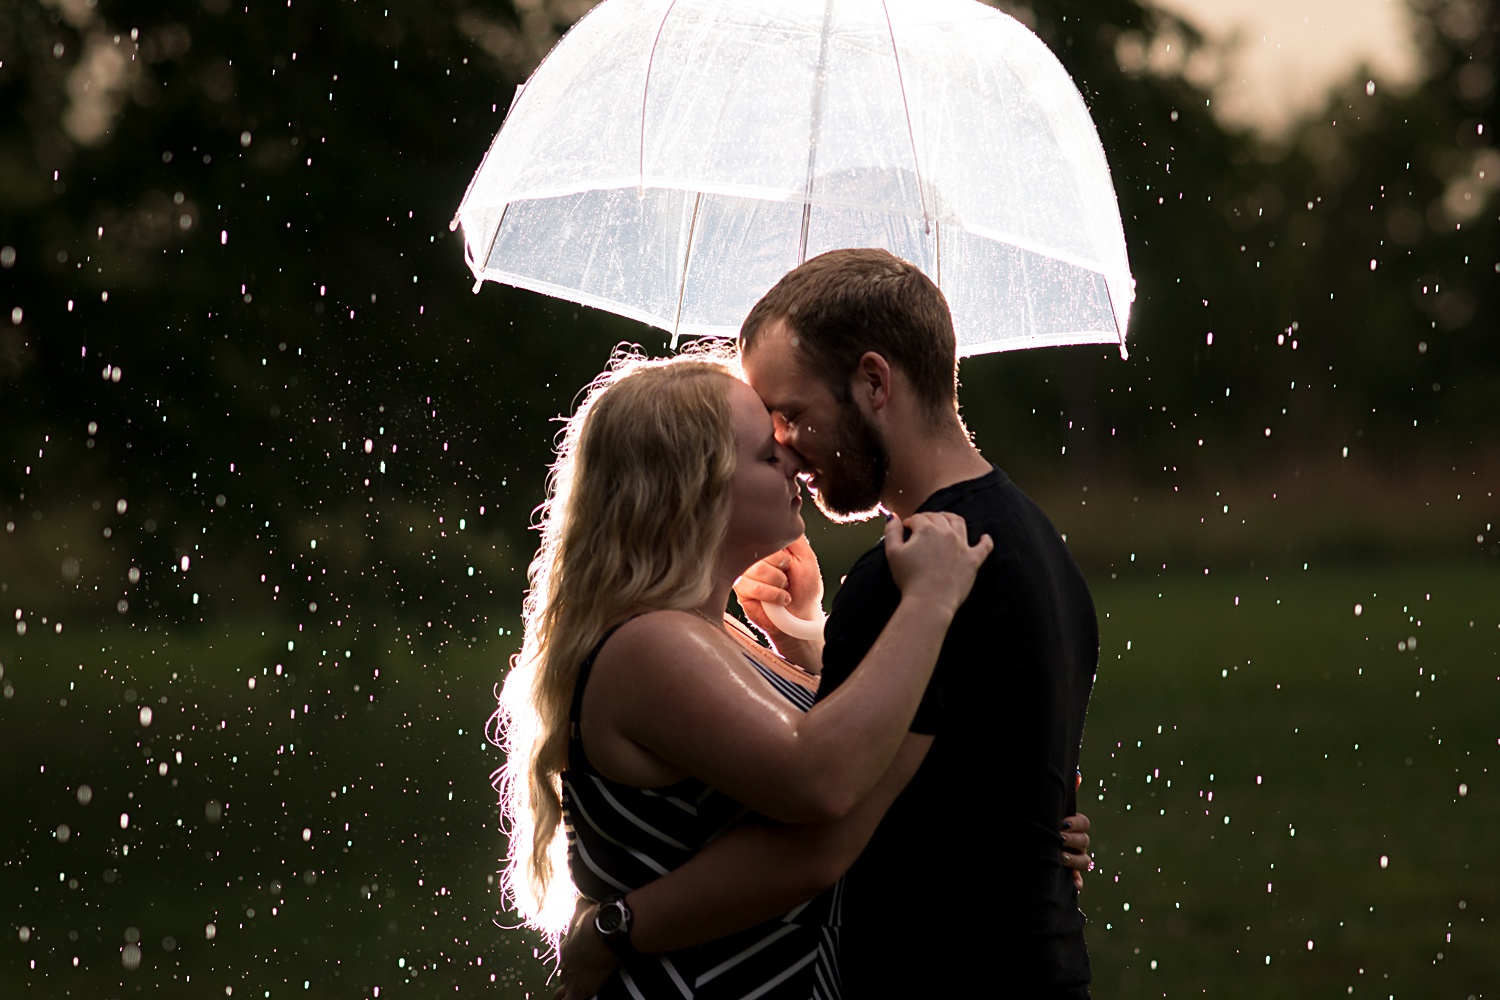 Umbrella photo in the rain for engagement session Emily Lynn Photography